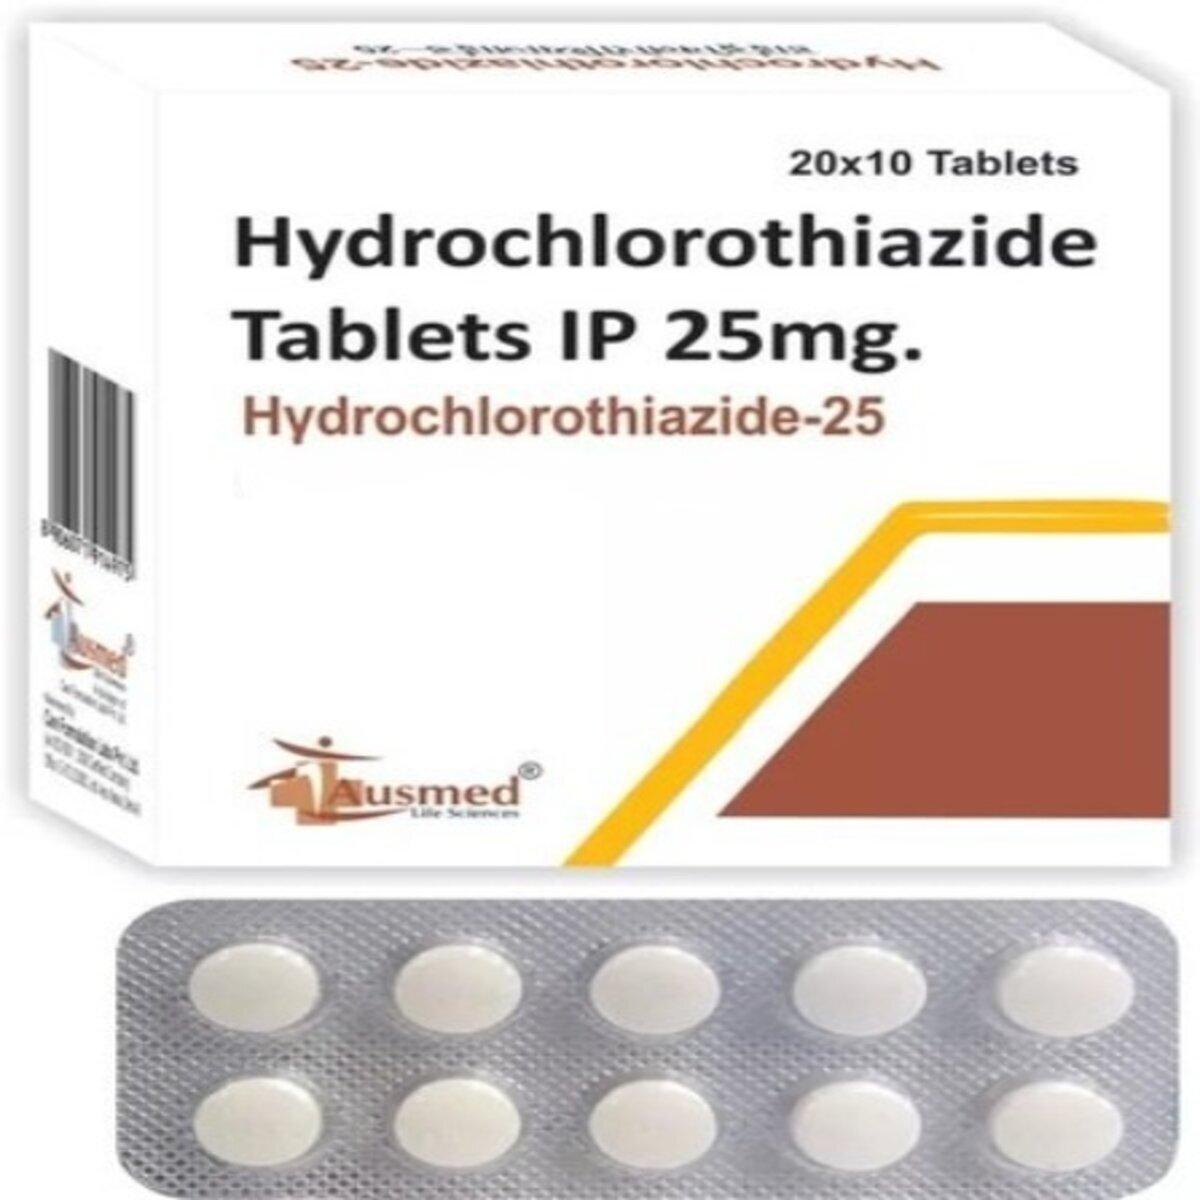 Hydrochlorothiazide Tablet Uses Benefits and Symptoms Side Effects